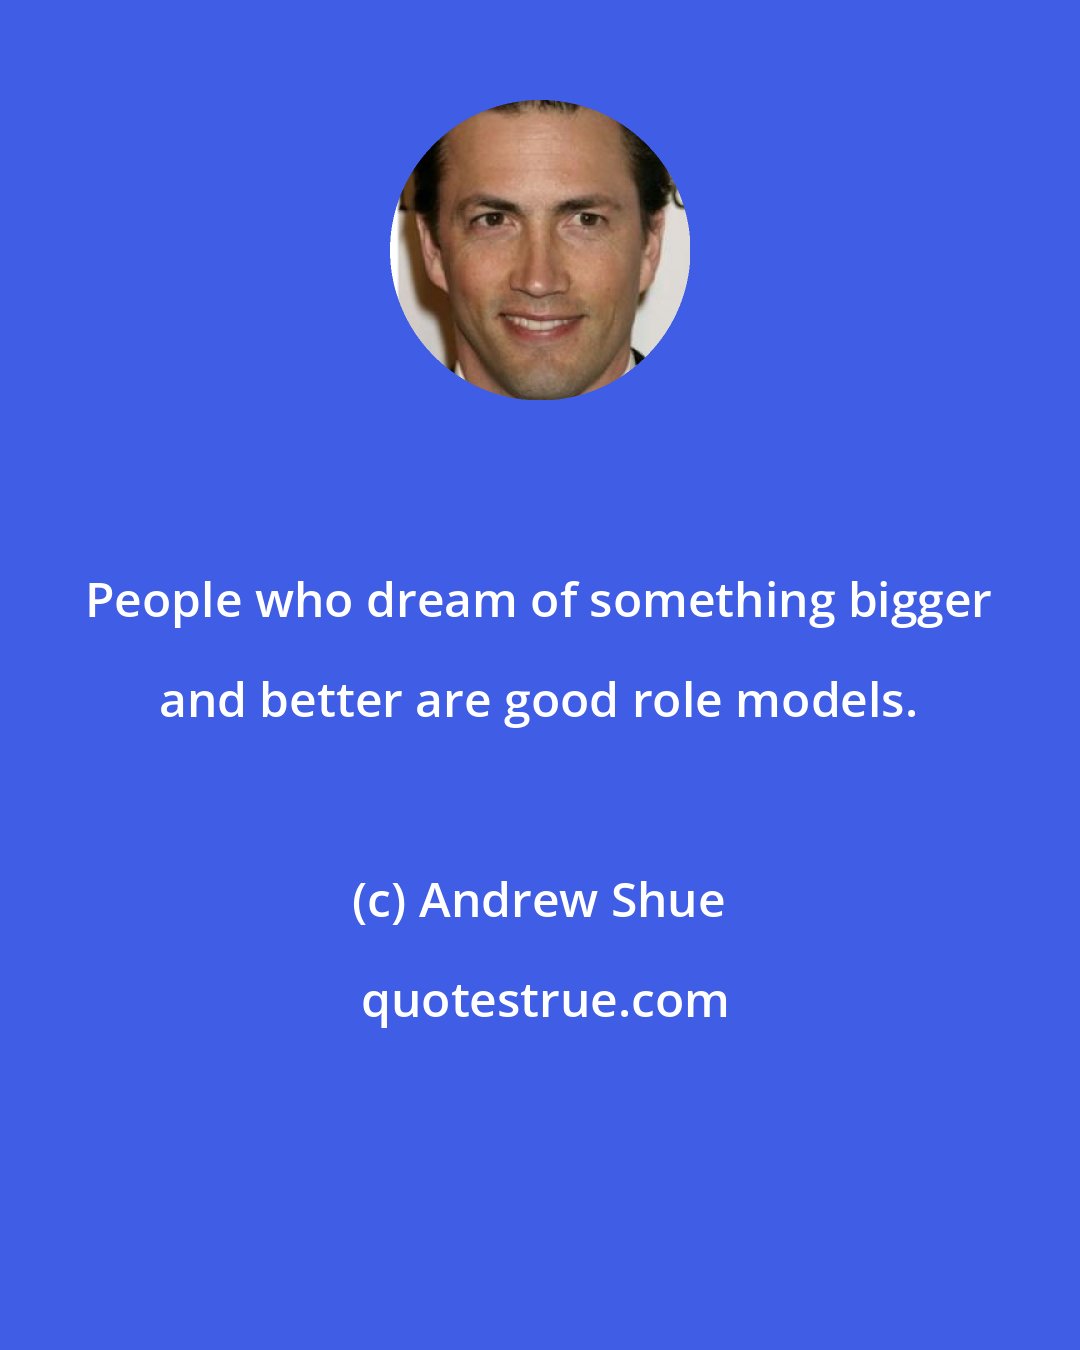 Andrew Shue: People who dream of something bigger and better are good role models.